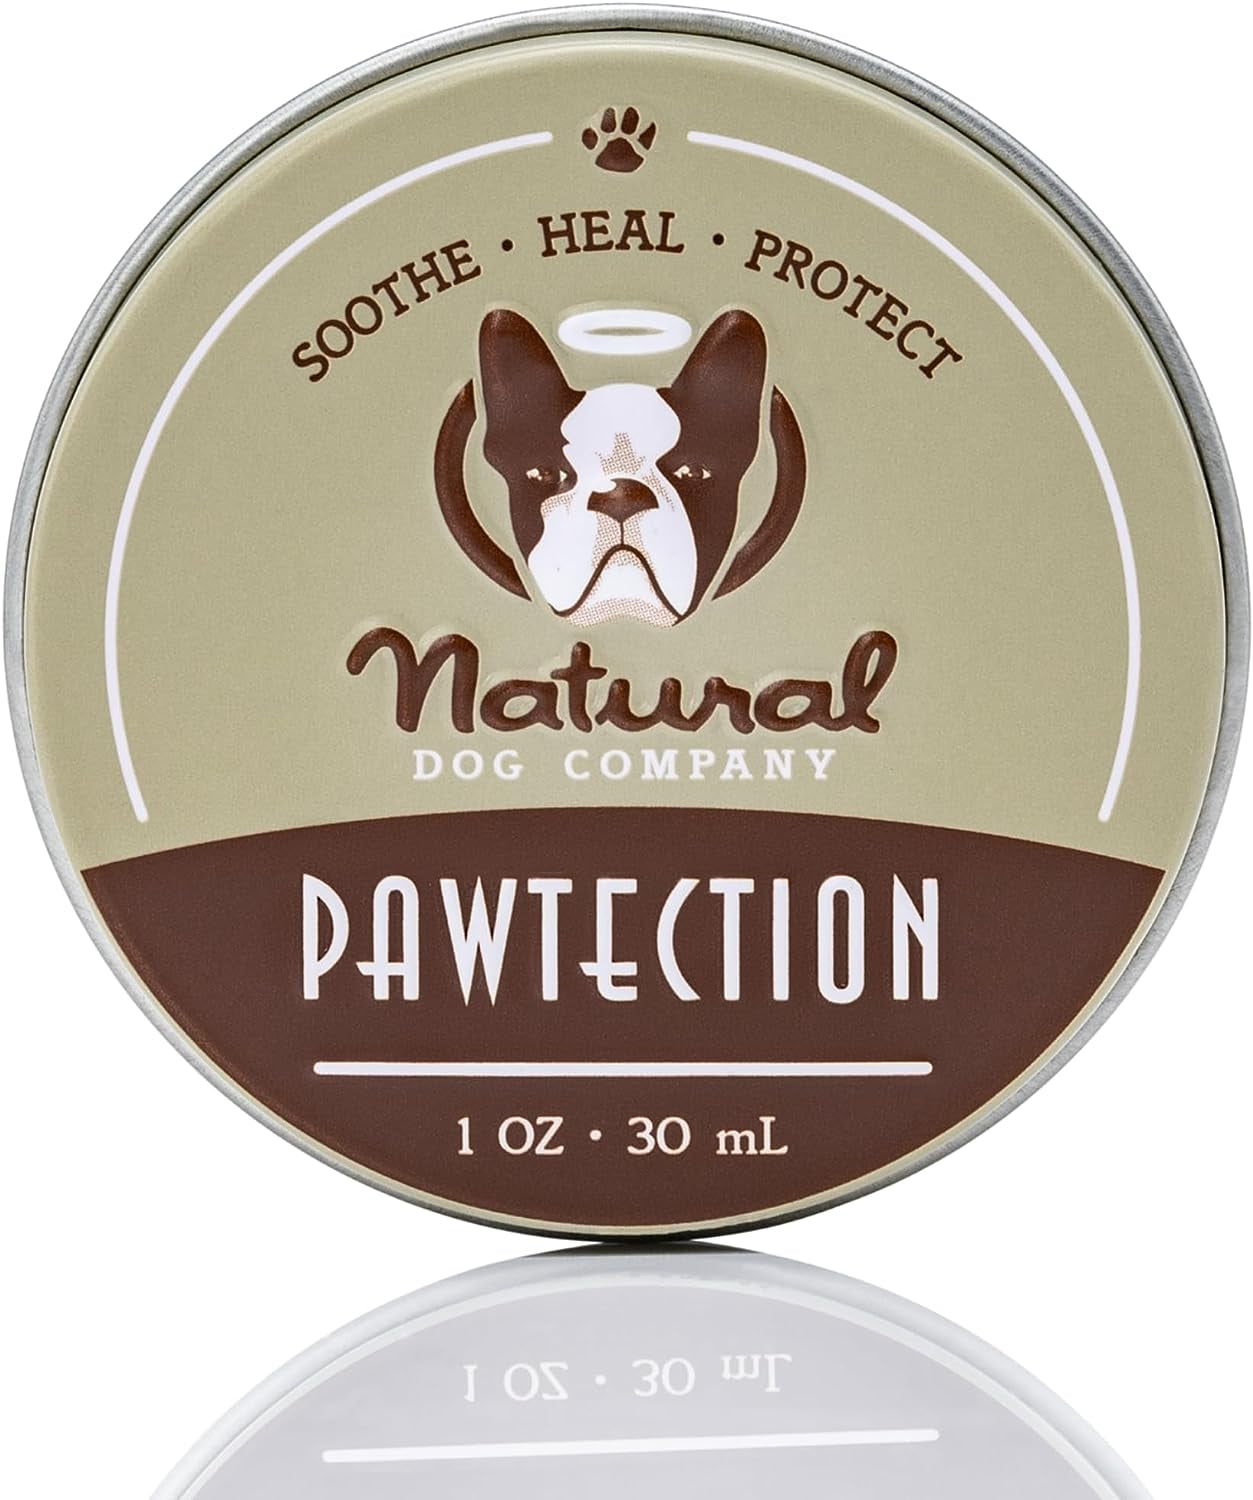 All-Natural Dog Paw Balm and Moisturizer, Veterinarian-Approved Pawtection for Nourishing and Protecting Dog Paws in Rough Terrain and Harsh Temperatures, 1 Oz Tin